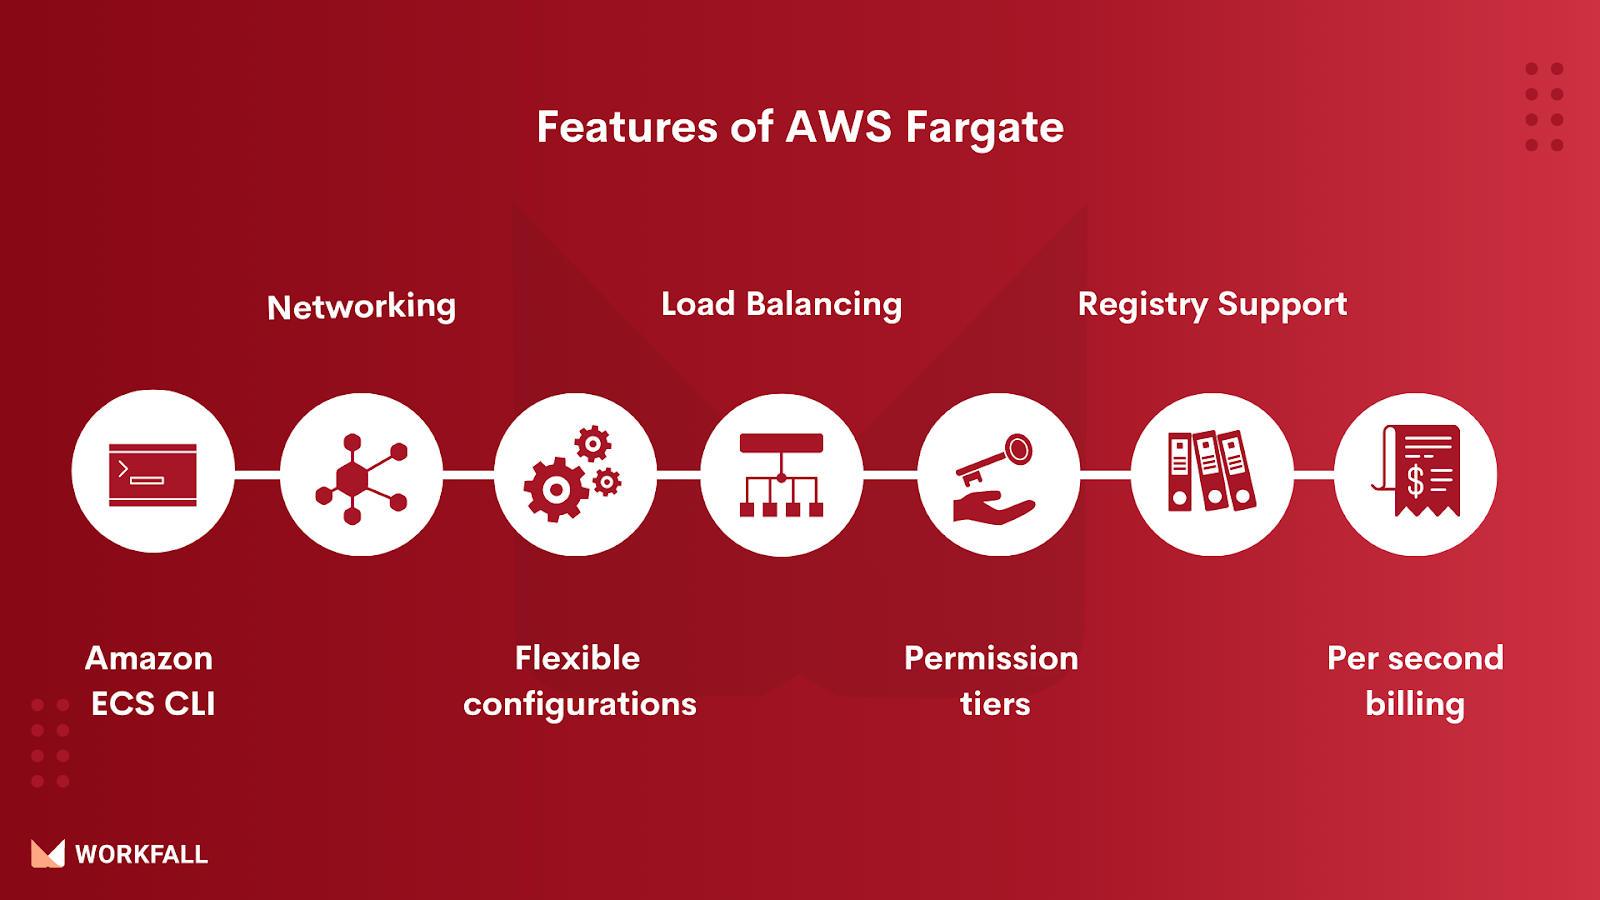 Features of AWS Fargate